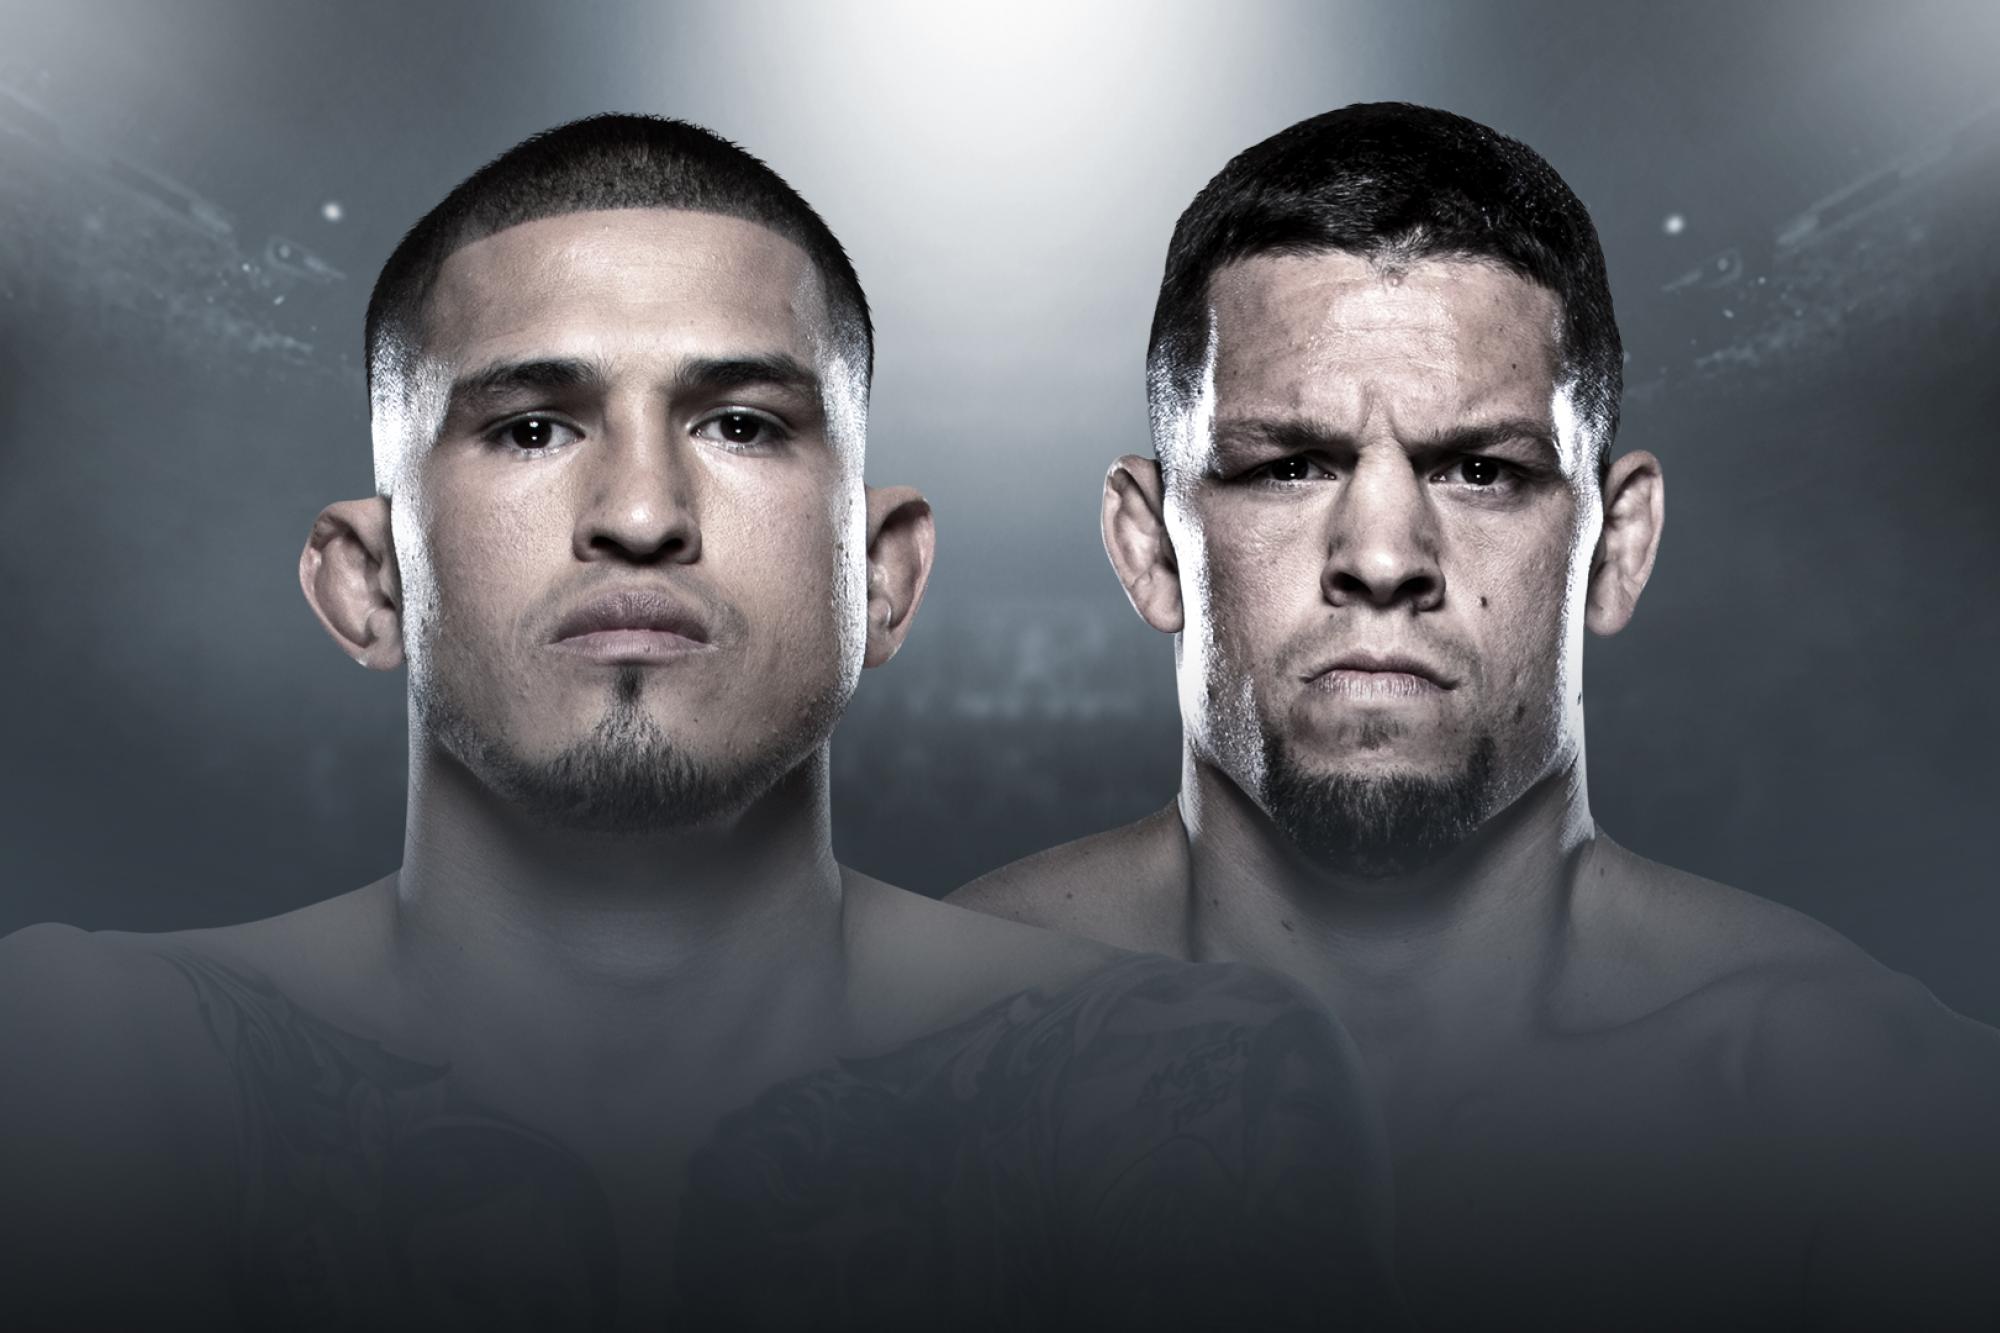 UFC 241 Nate Diaz vs Anthony Pettis: Nate Diaz to Lose His First Match Back in UFC ...